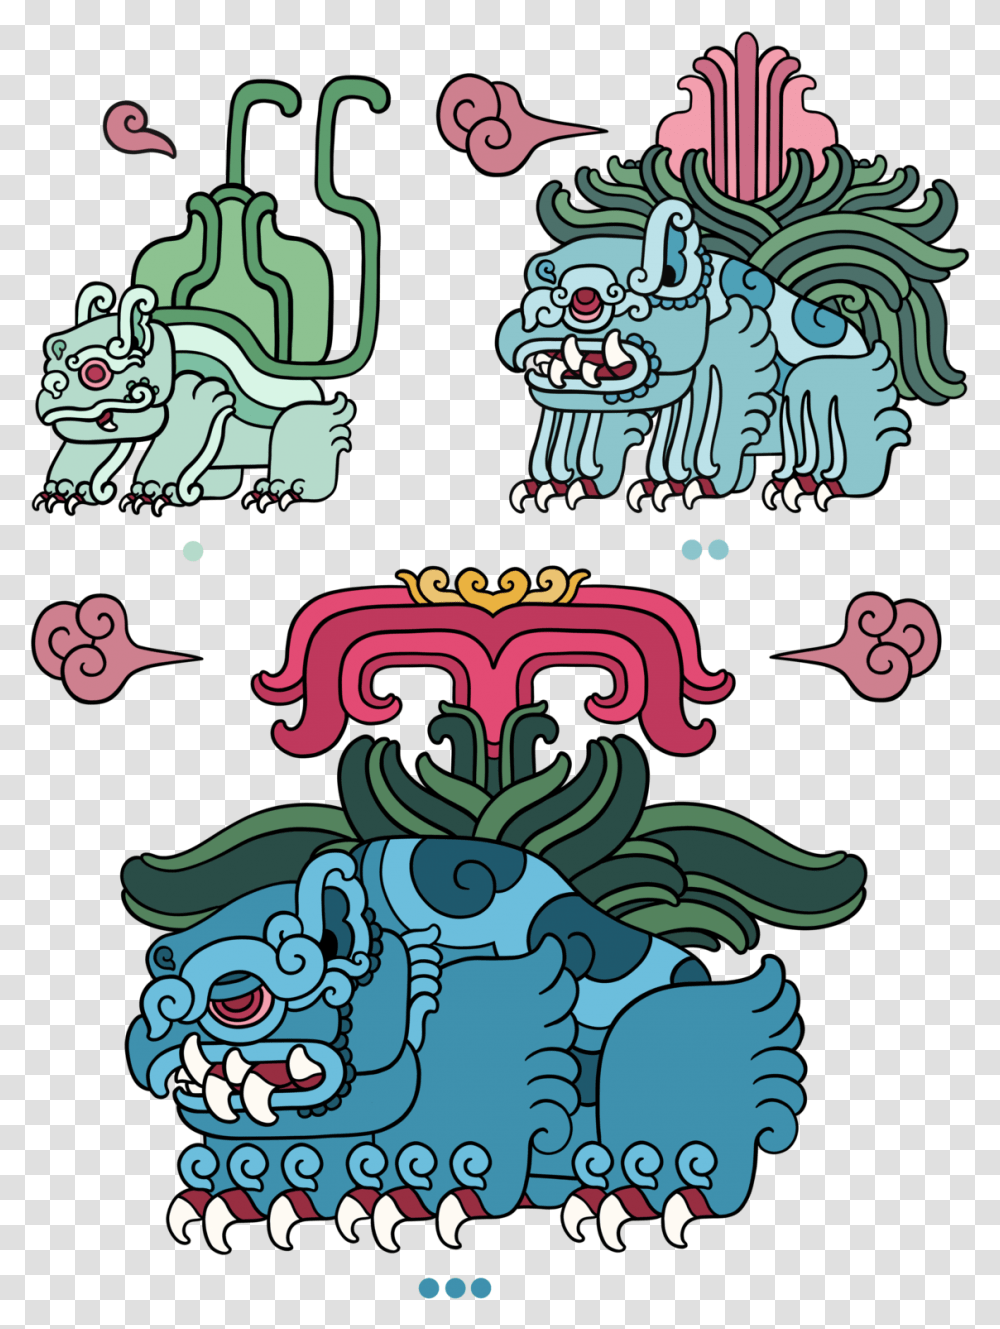 Download Digital Drawing Of The Pokemon Bulbasaur Ivysaur Pokemon Bulbasaur Ivysaur Venusaur, Poster, Doodle, Art, Graphics Transparent Png